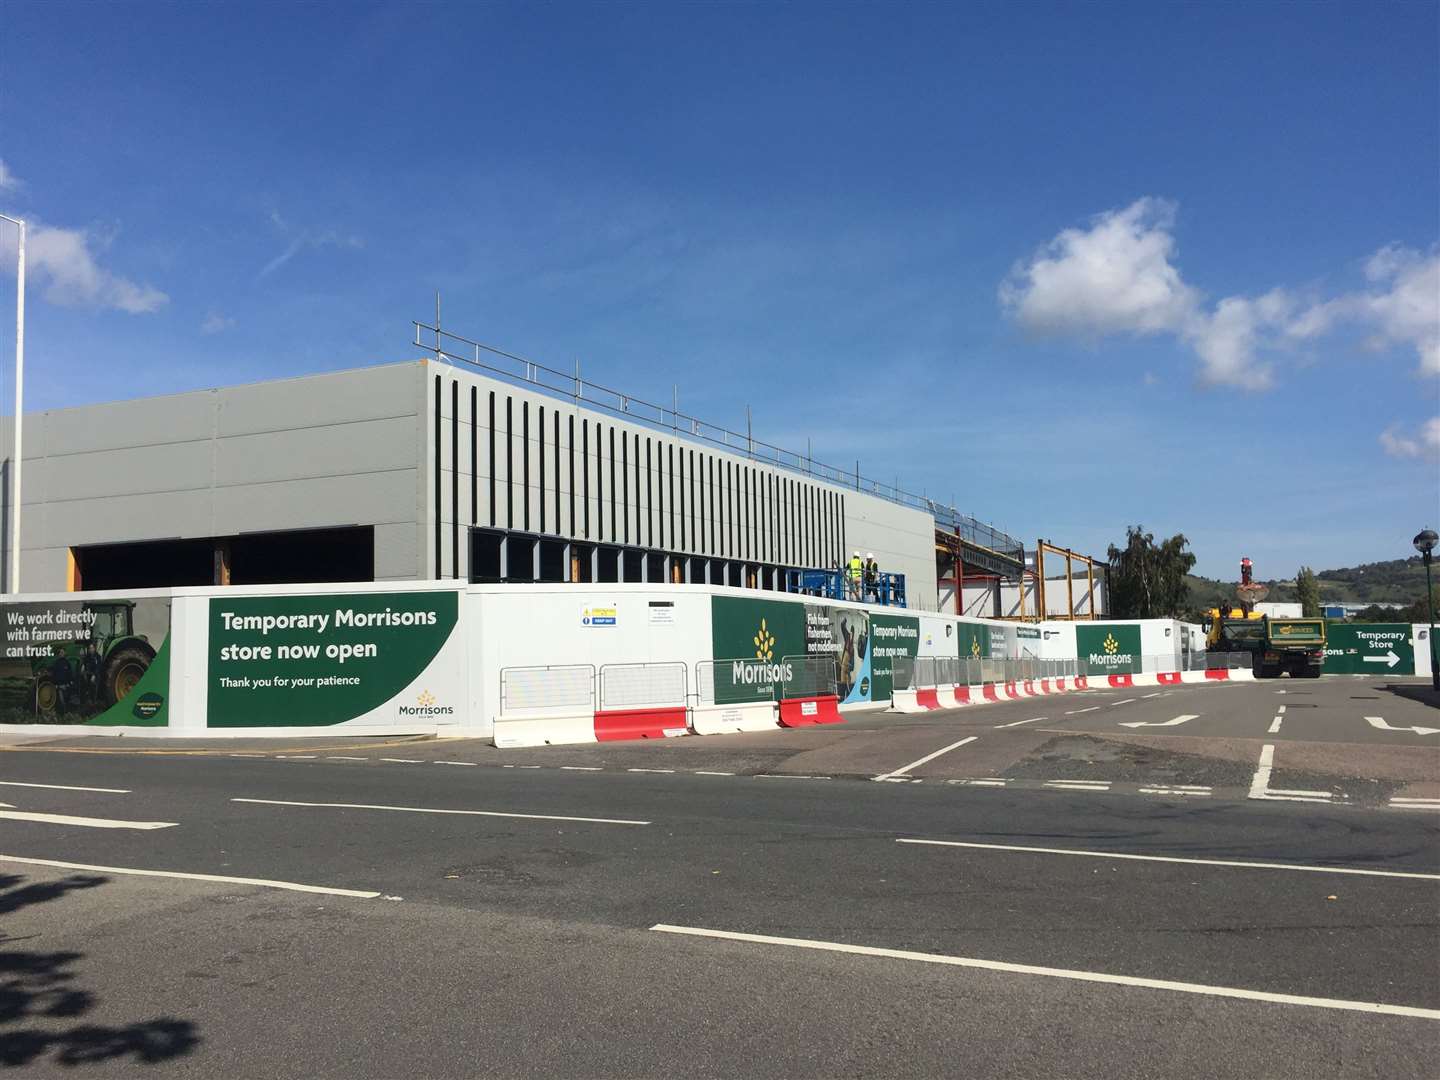 Work has been taking place to re-build Morrisons since May this year